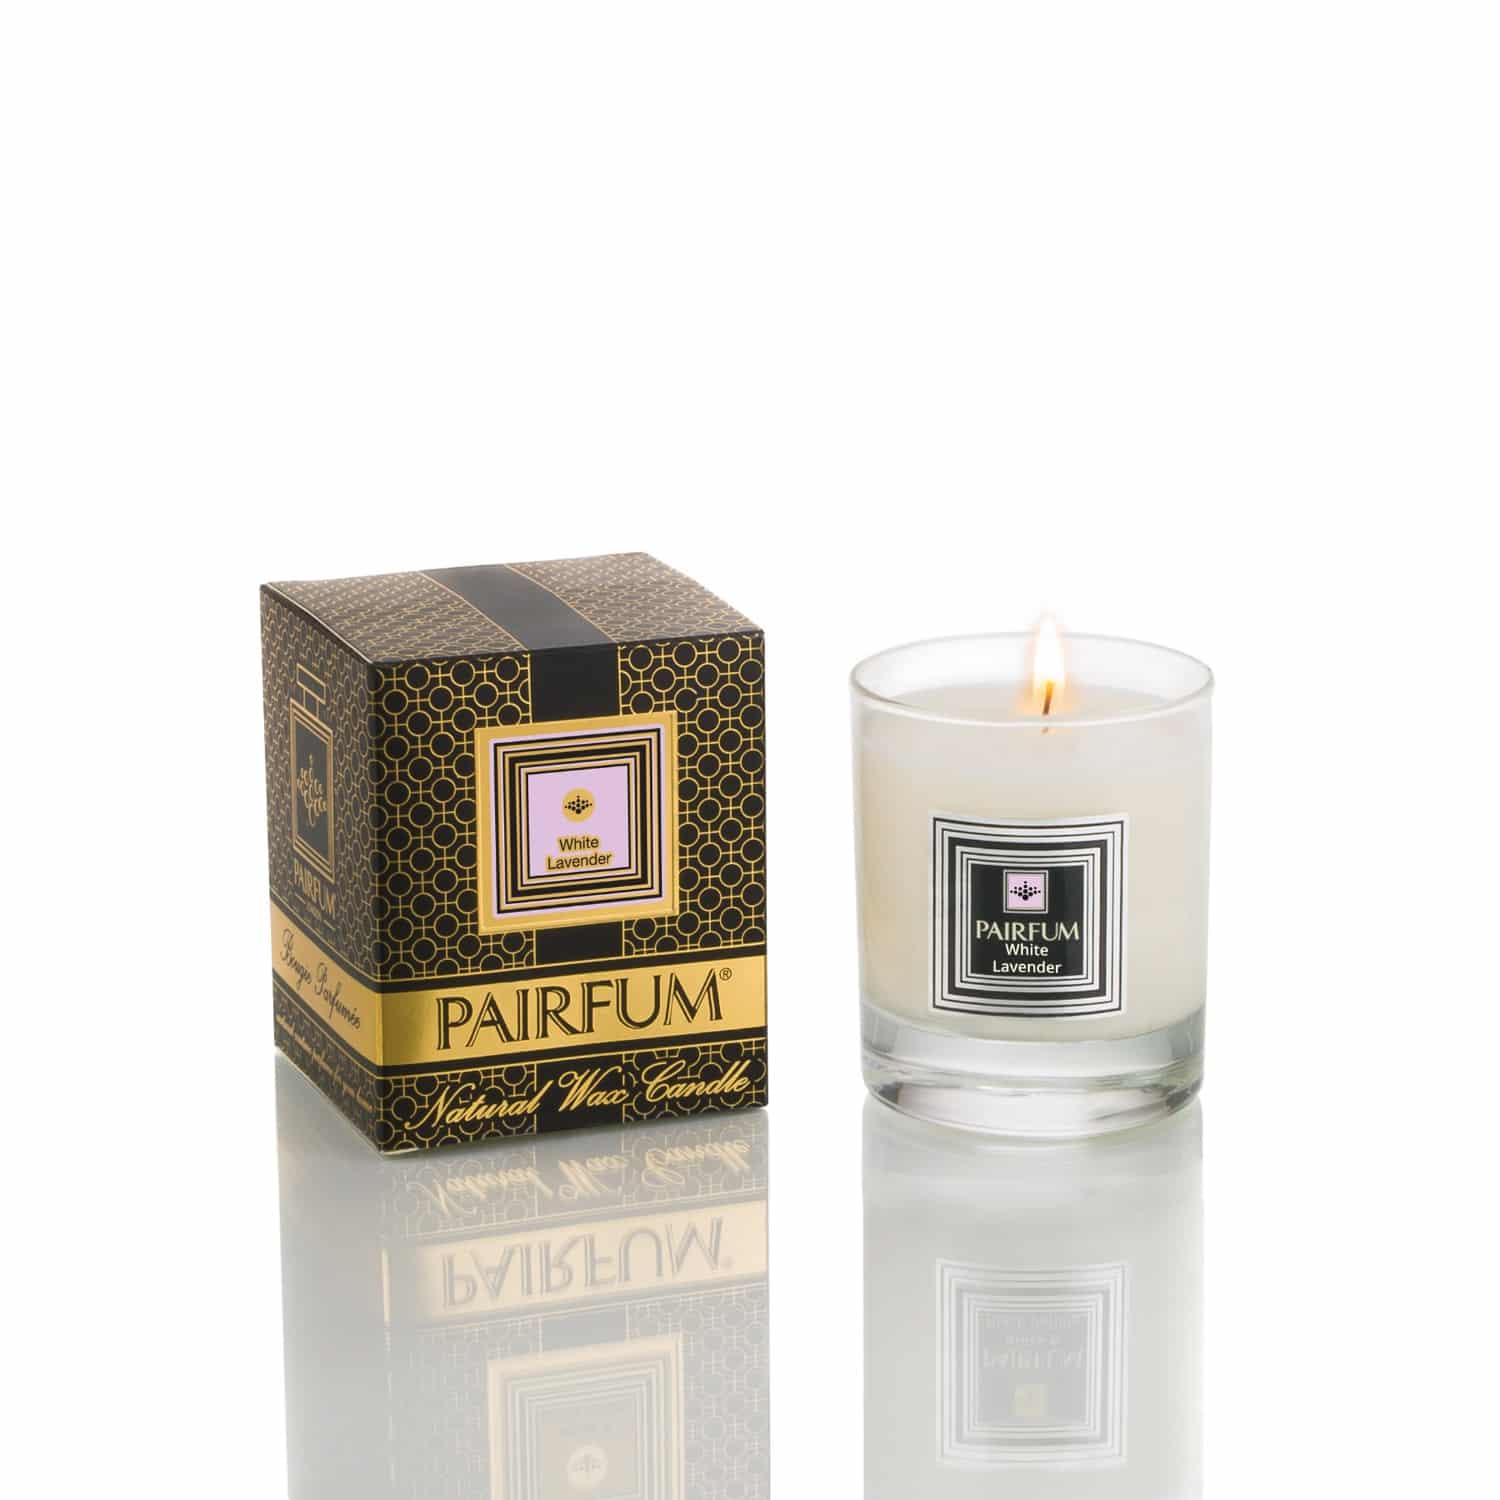 Cosy atmosphere with scented candles, Pairfum's natural scented candle.